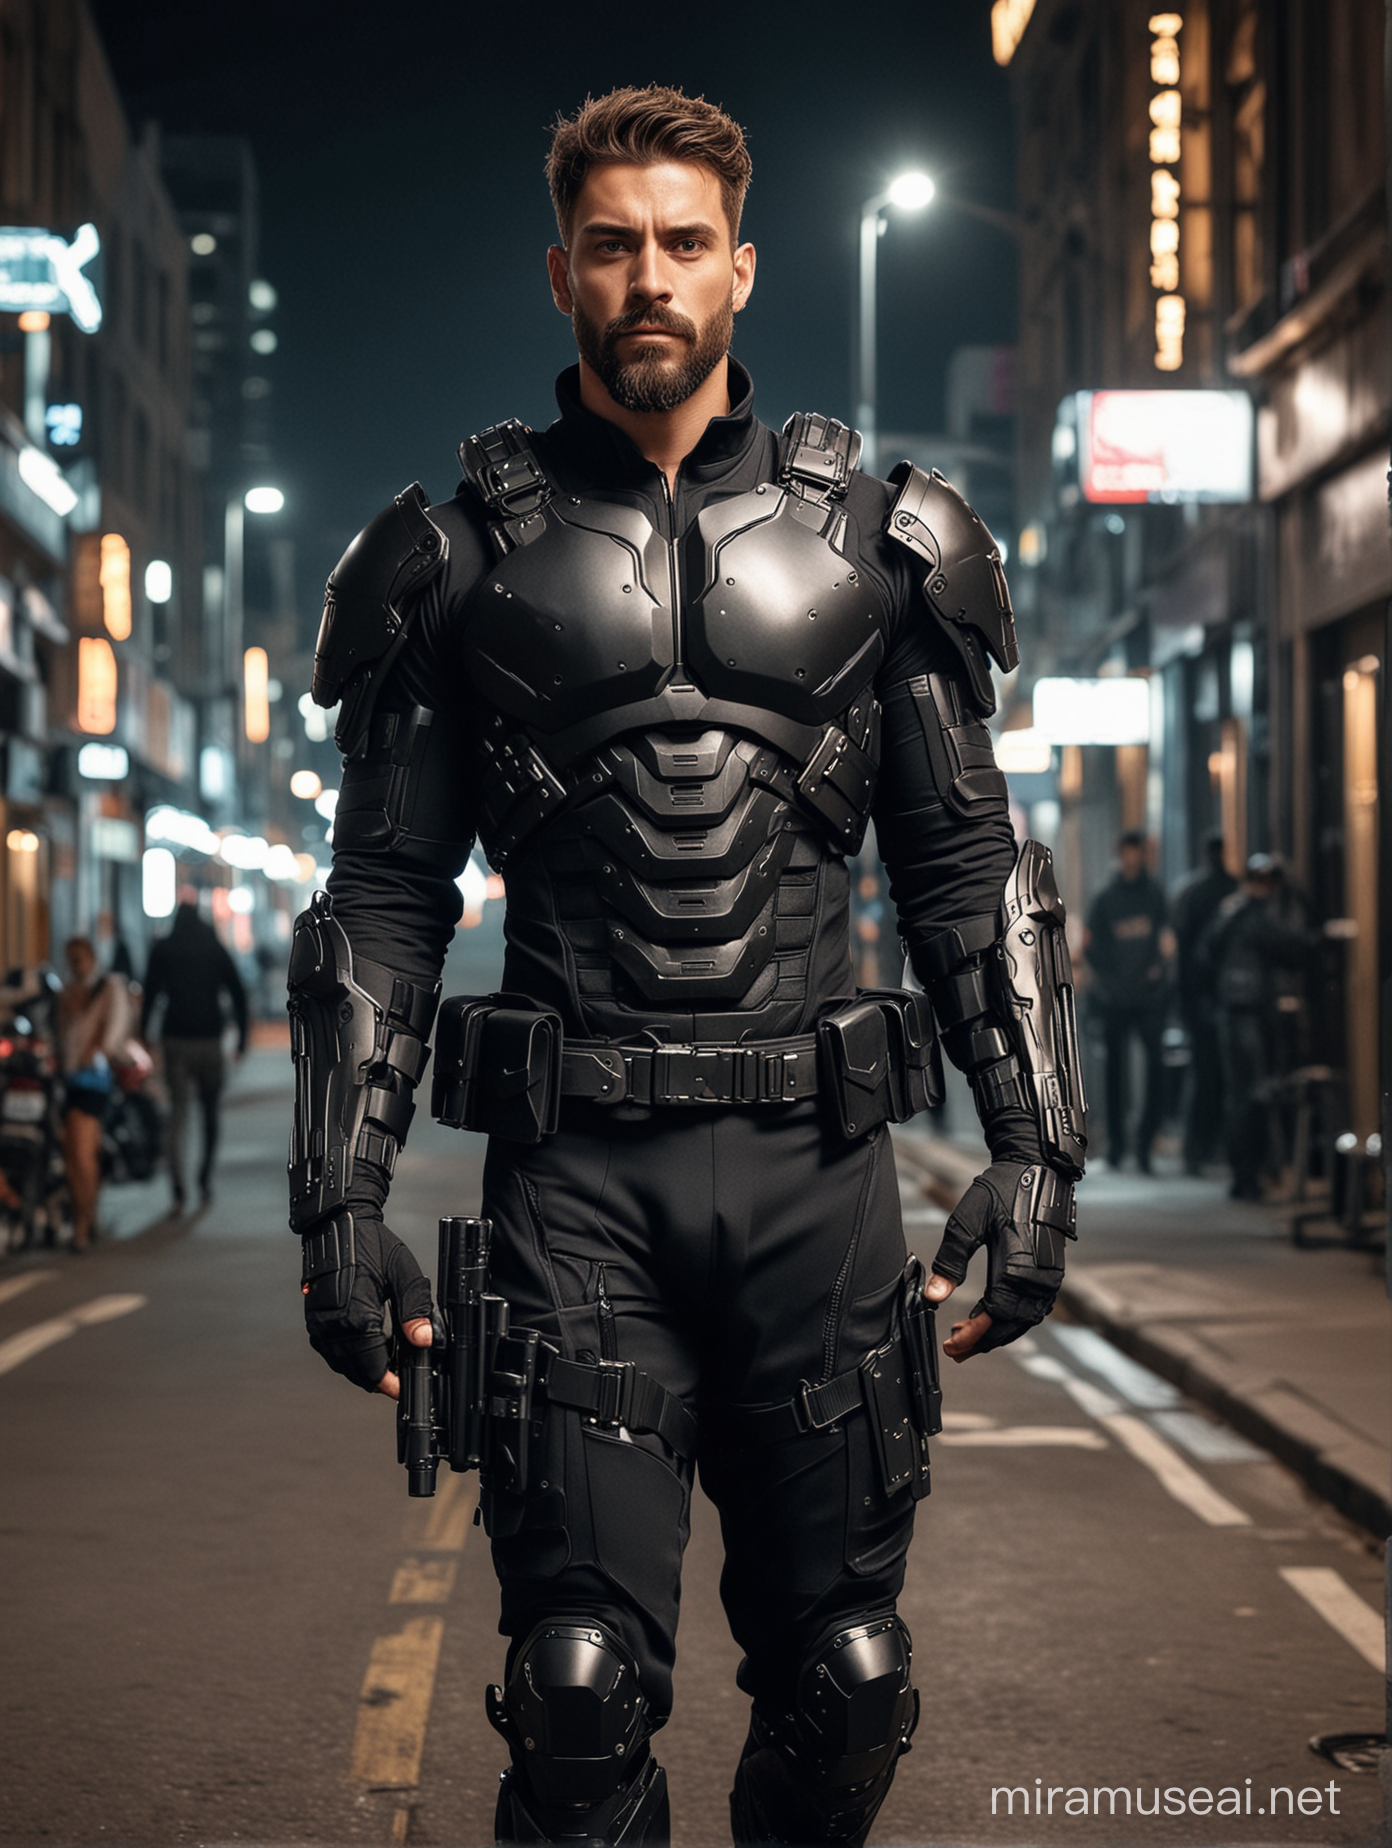 Attractive Muscular Men in SciFi High Tech Armor Suit with Firearms